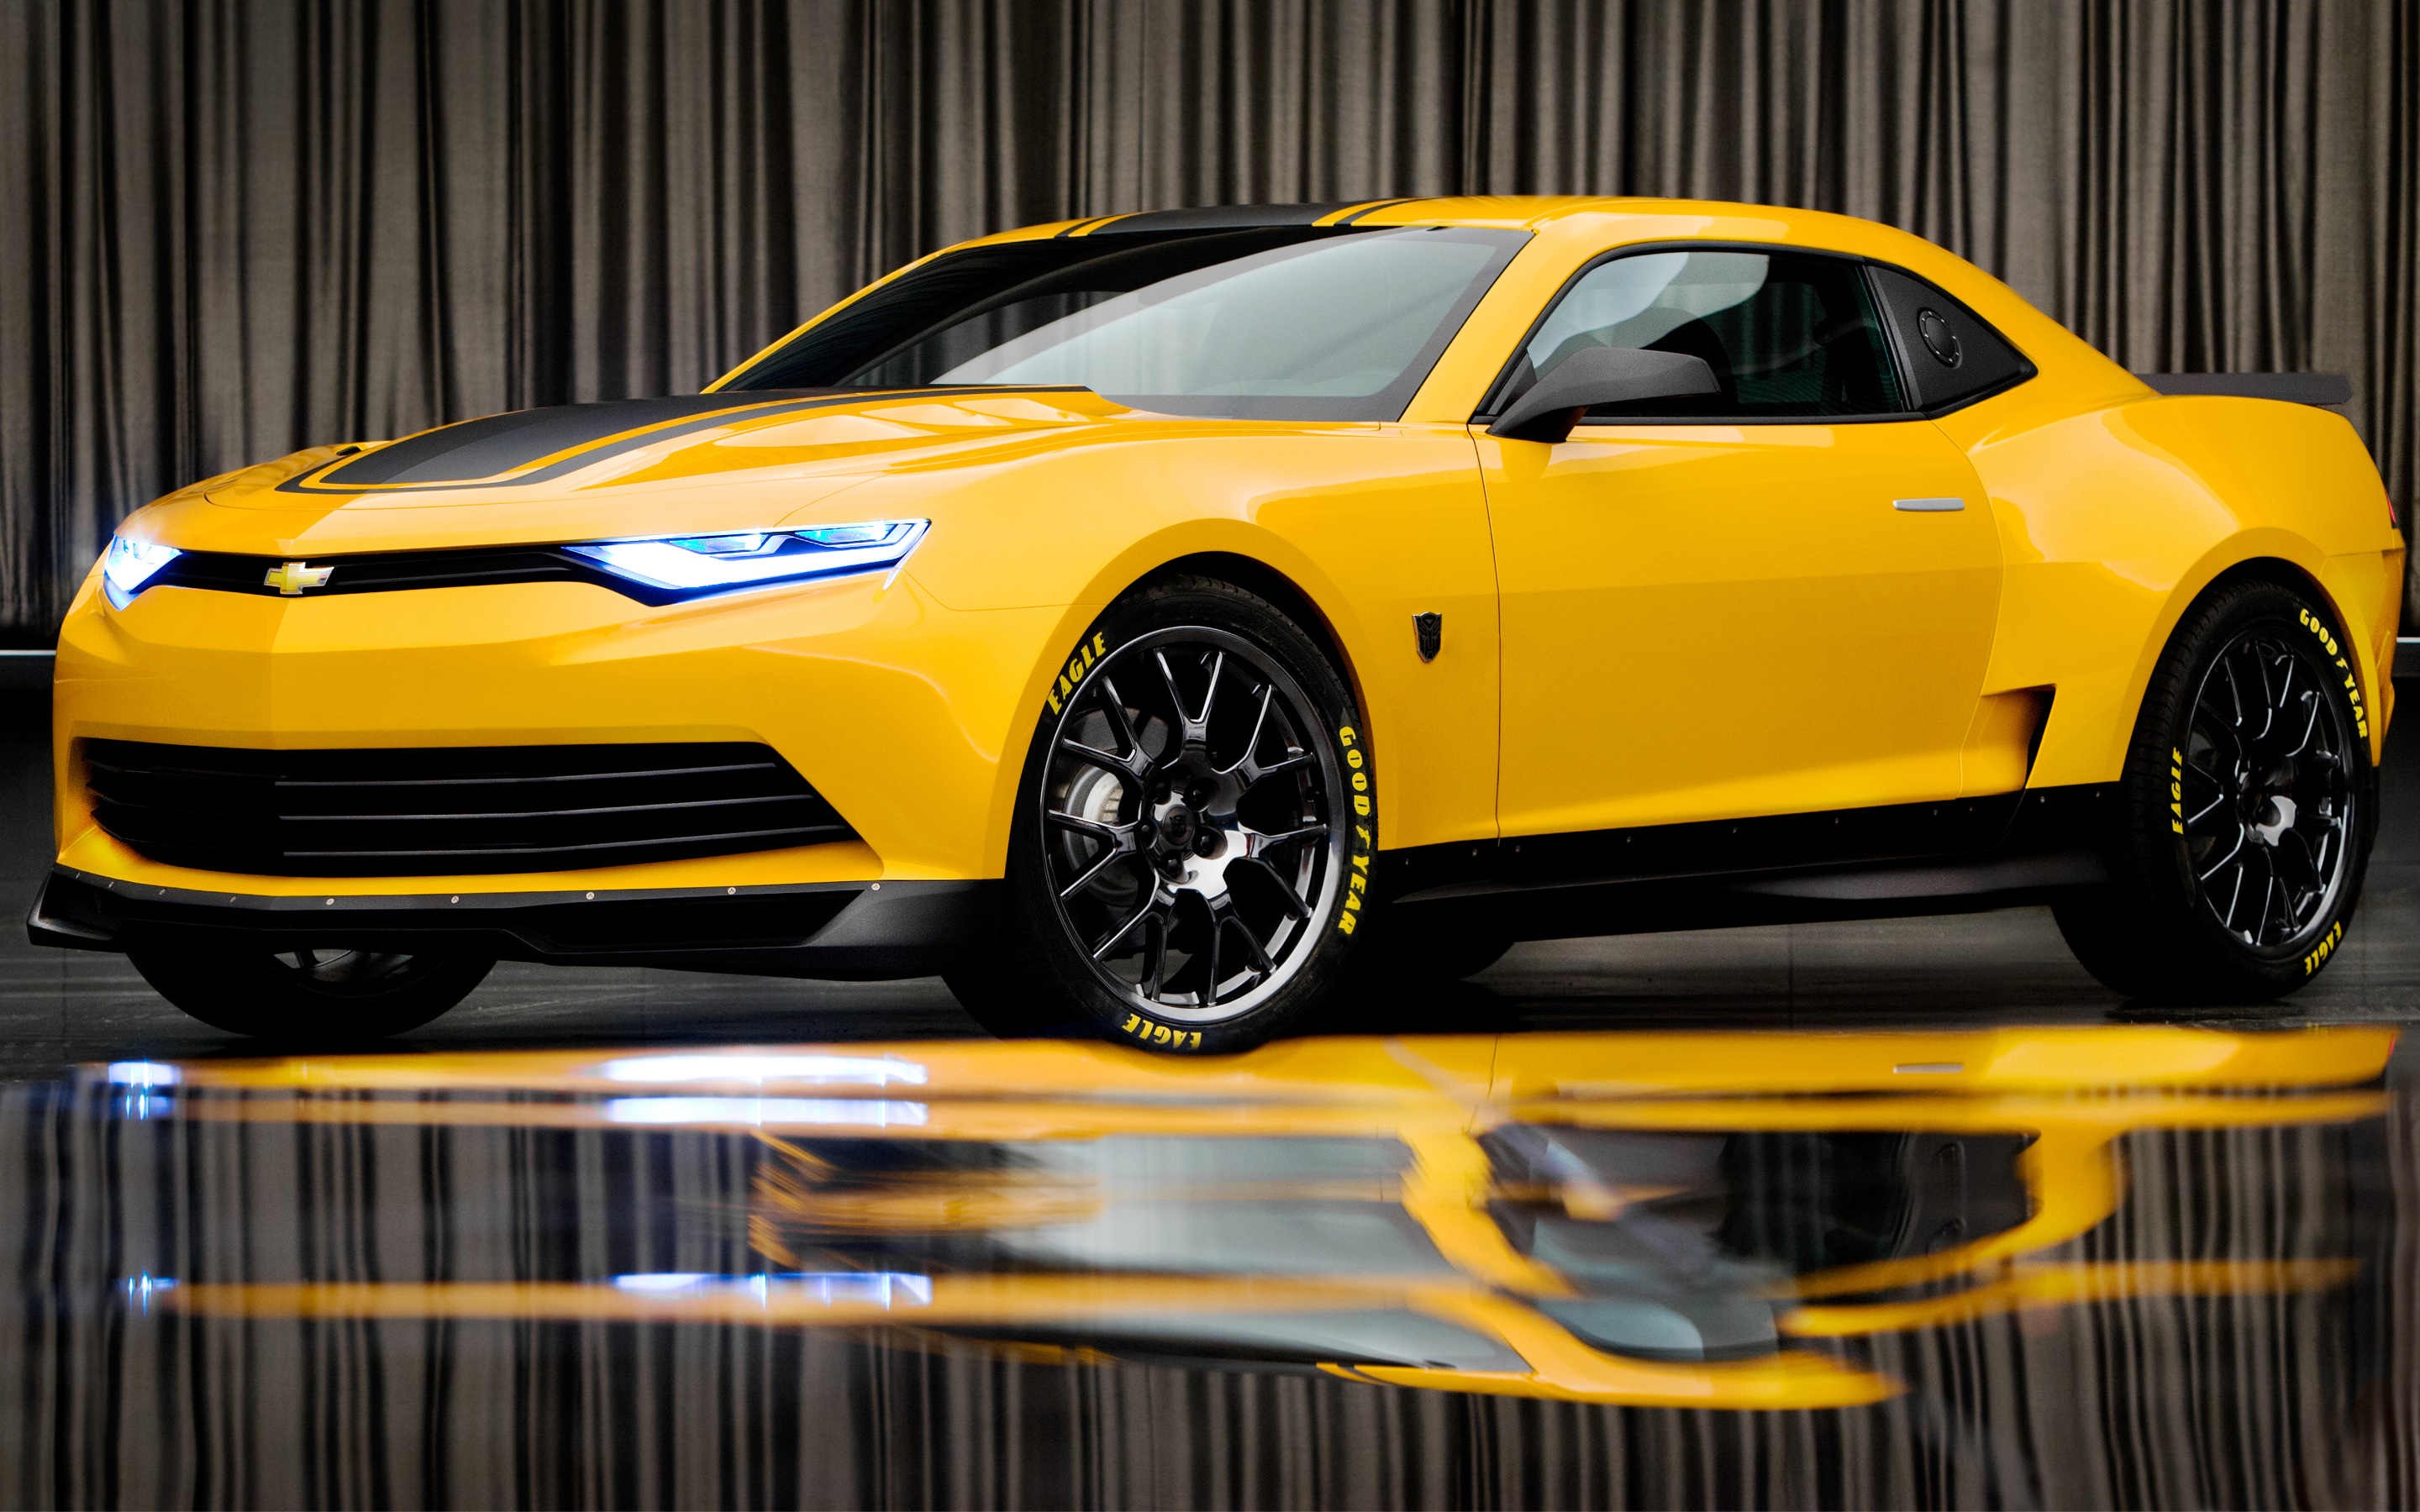 General 2880x1800 Chevrolet yellow car sports car yellow cars vehicle reflection Chevrolet Camaro muscle cars American cars